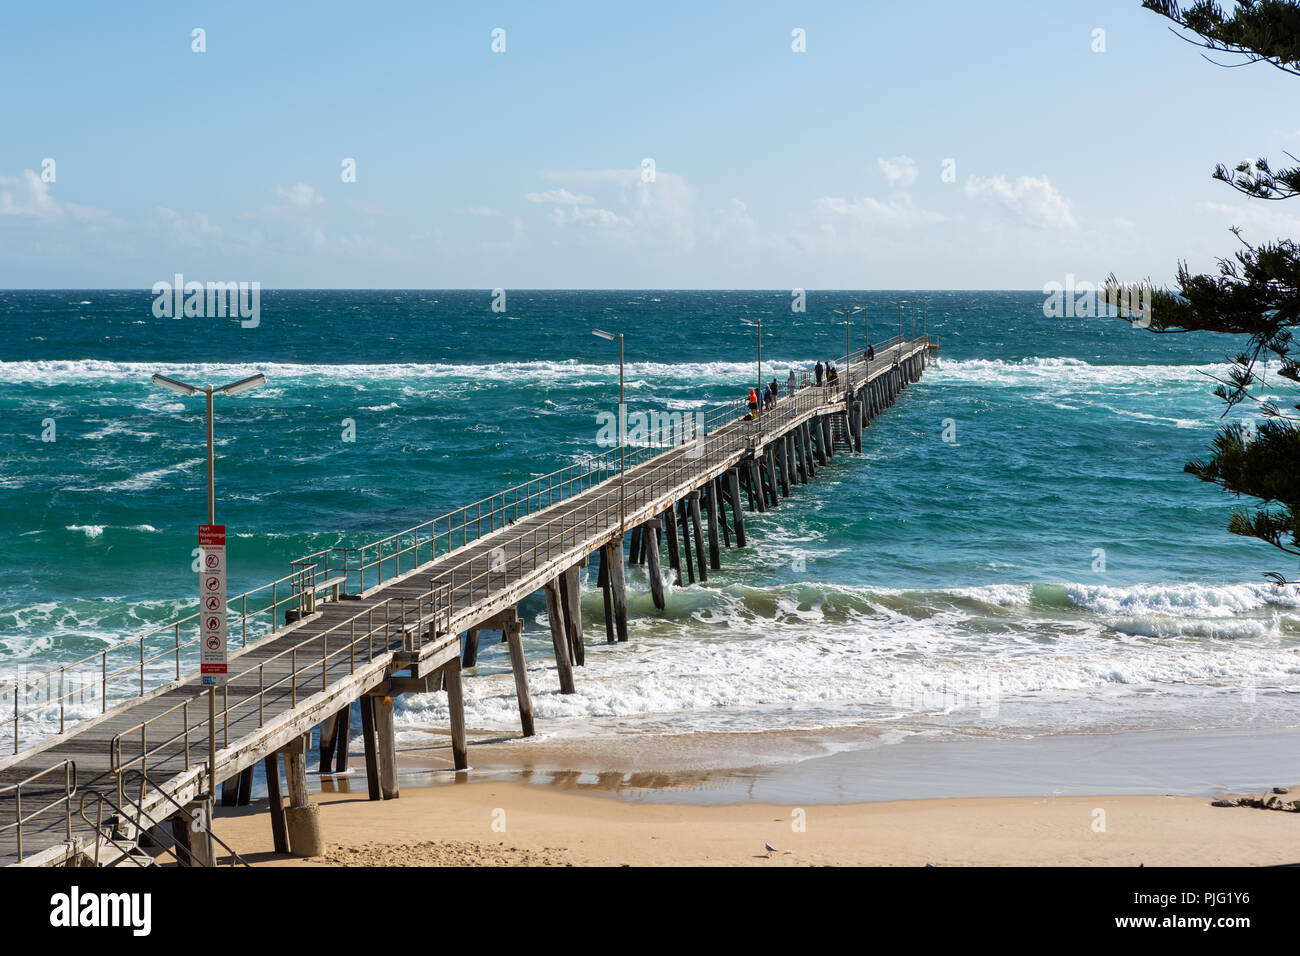 The Port Noarlunga Jetty with rough seas and people fishing in South Australia on the 6th September 2018 Stock Photo